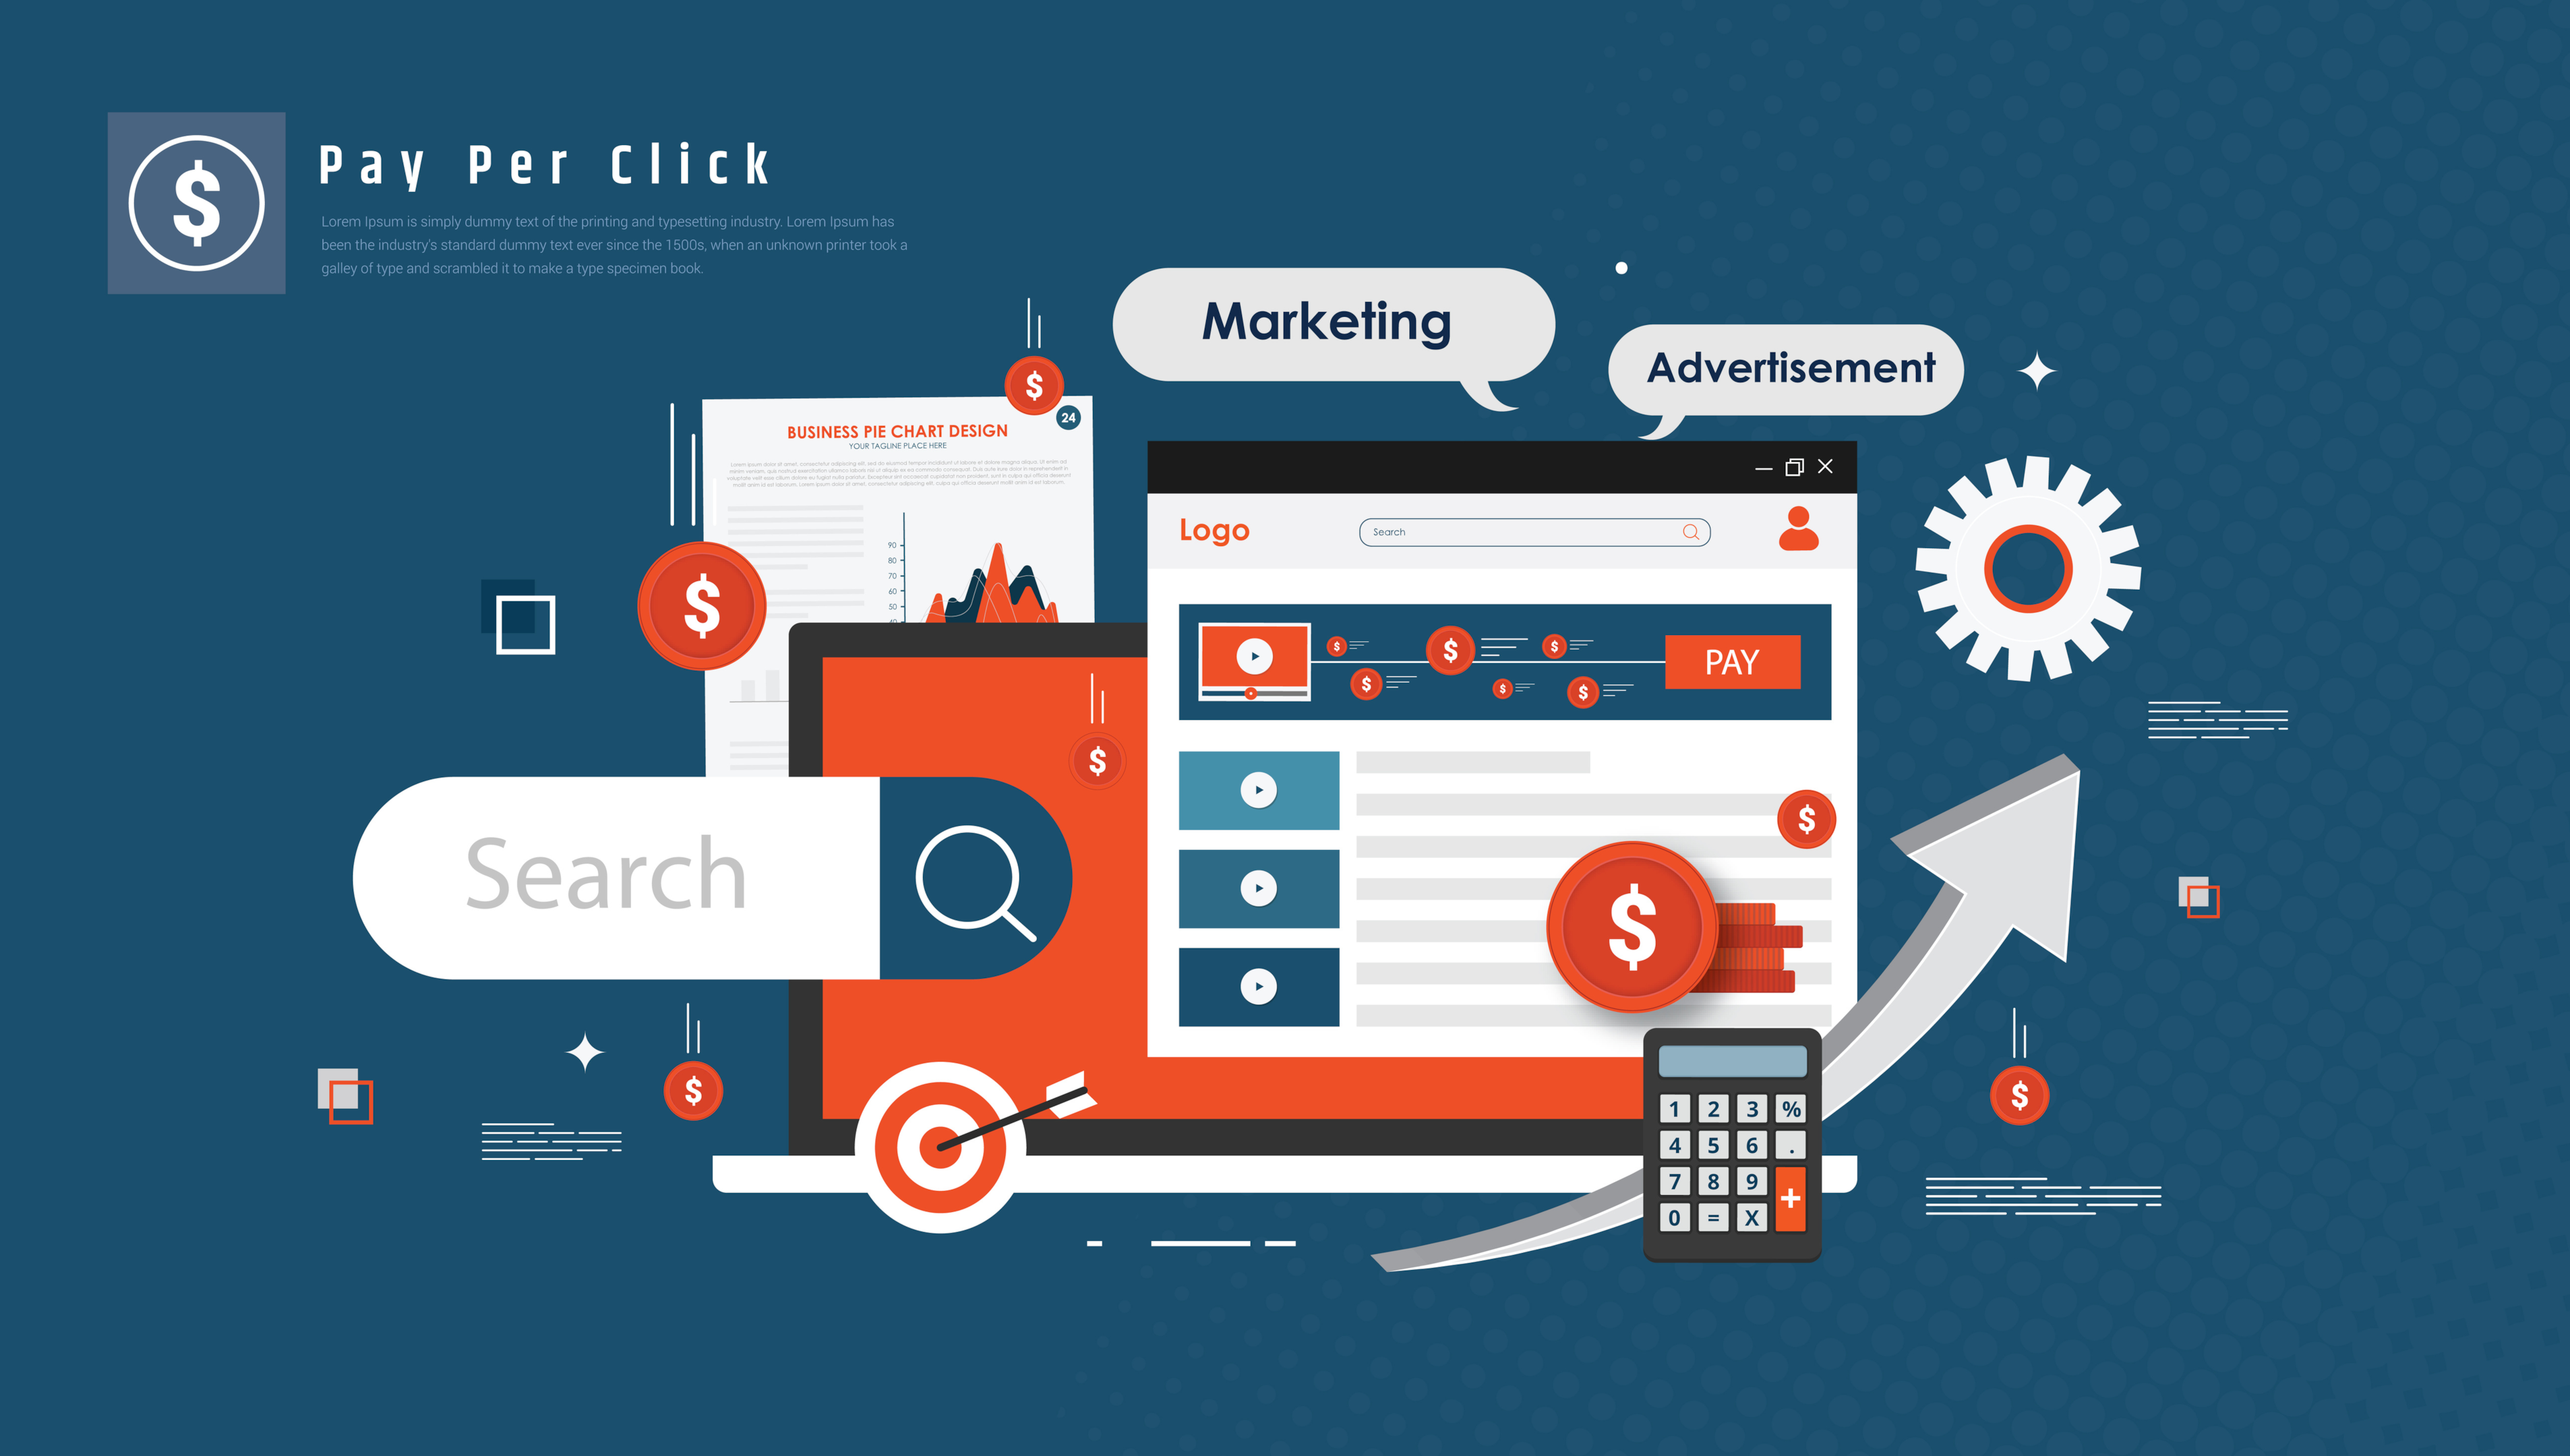 Paid search traffic can provide a short-term boost the success of your website.